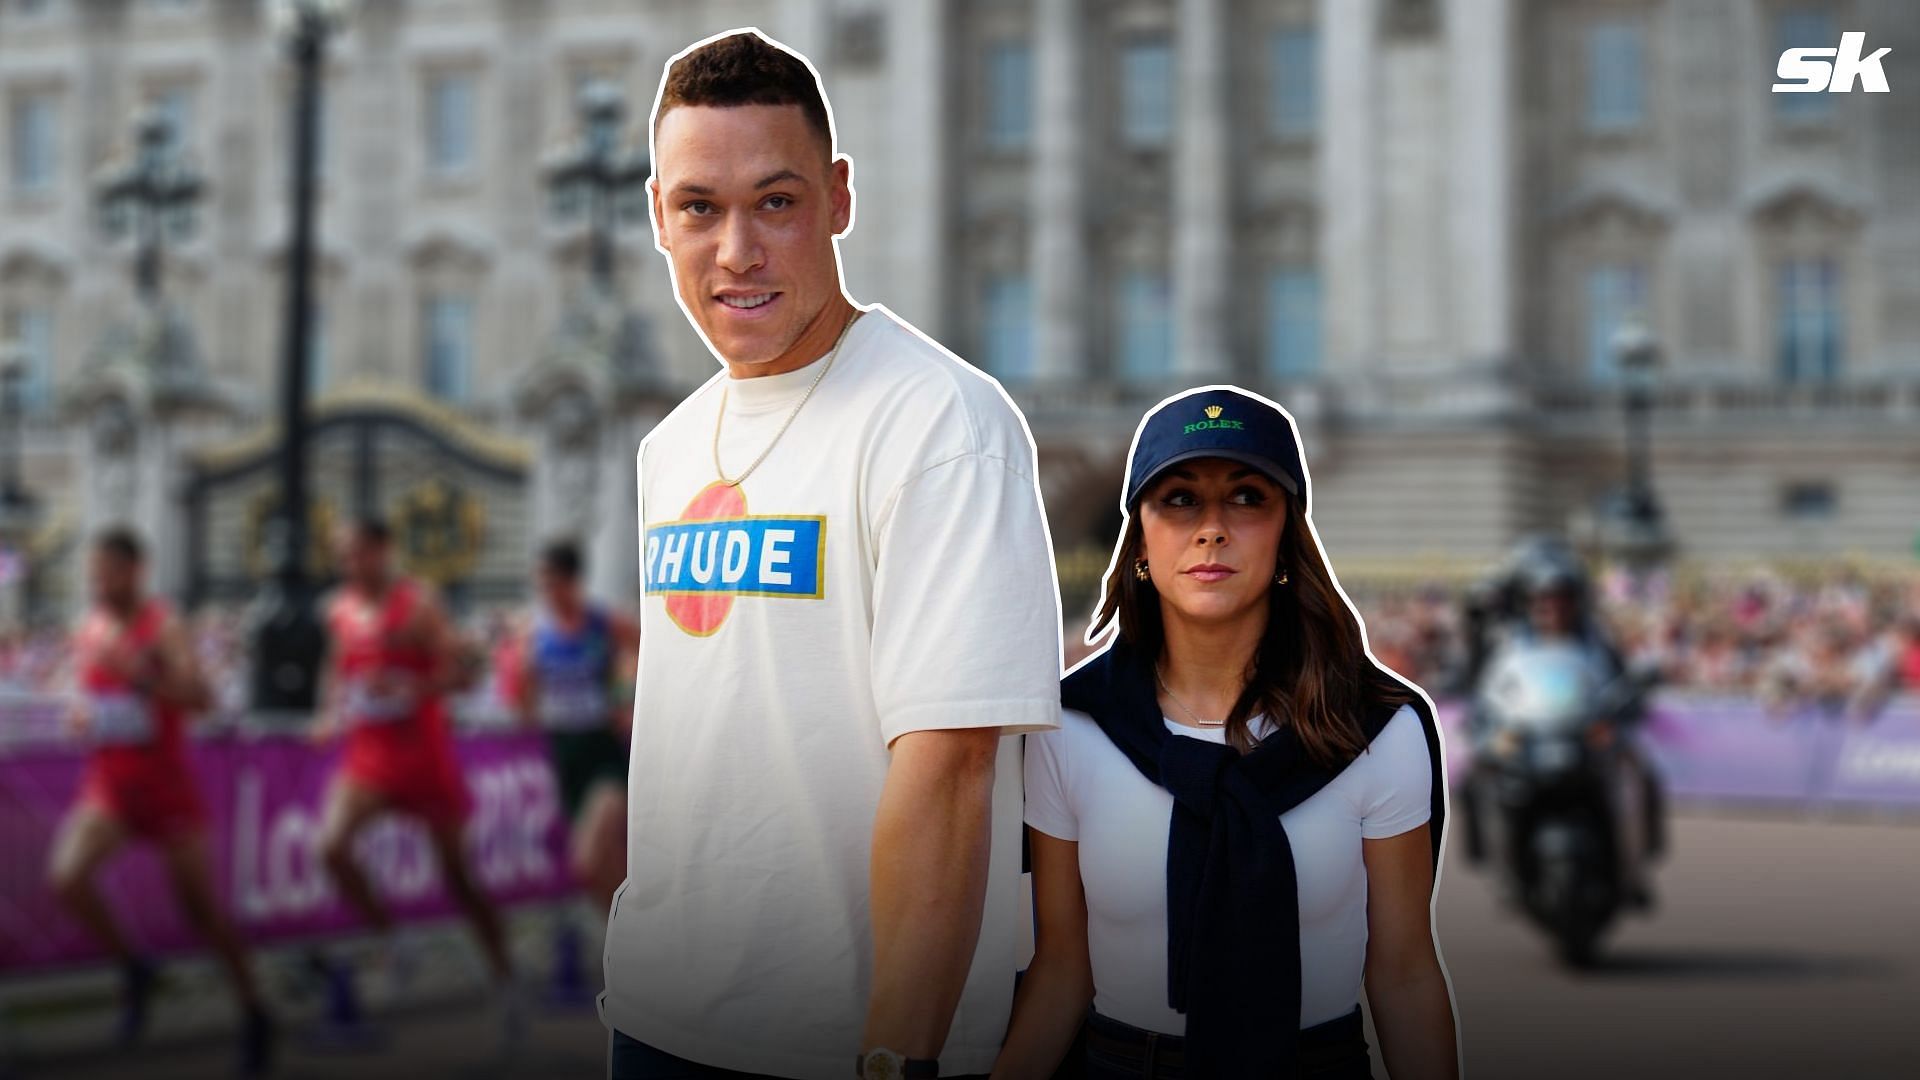 &quot;Killed it this morning&quot; - Yankees superstar Aaron Judge commends wife Samantha on her marathon initiative